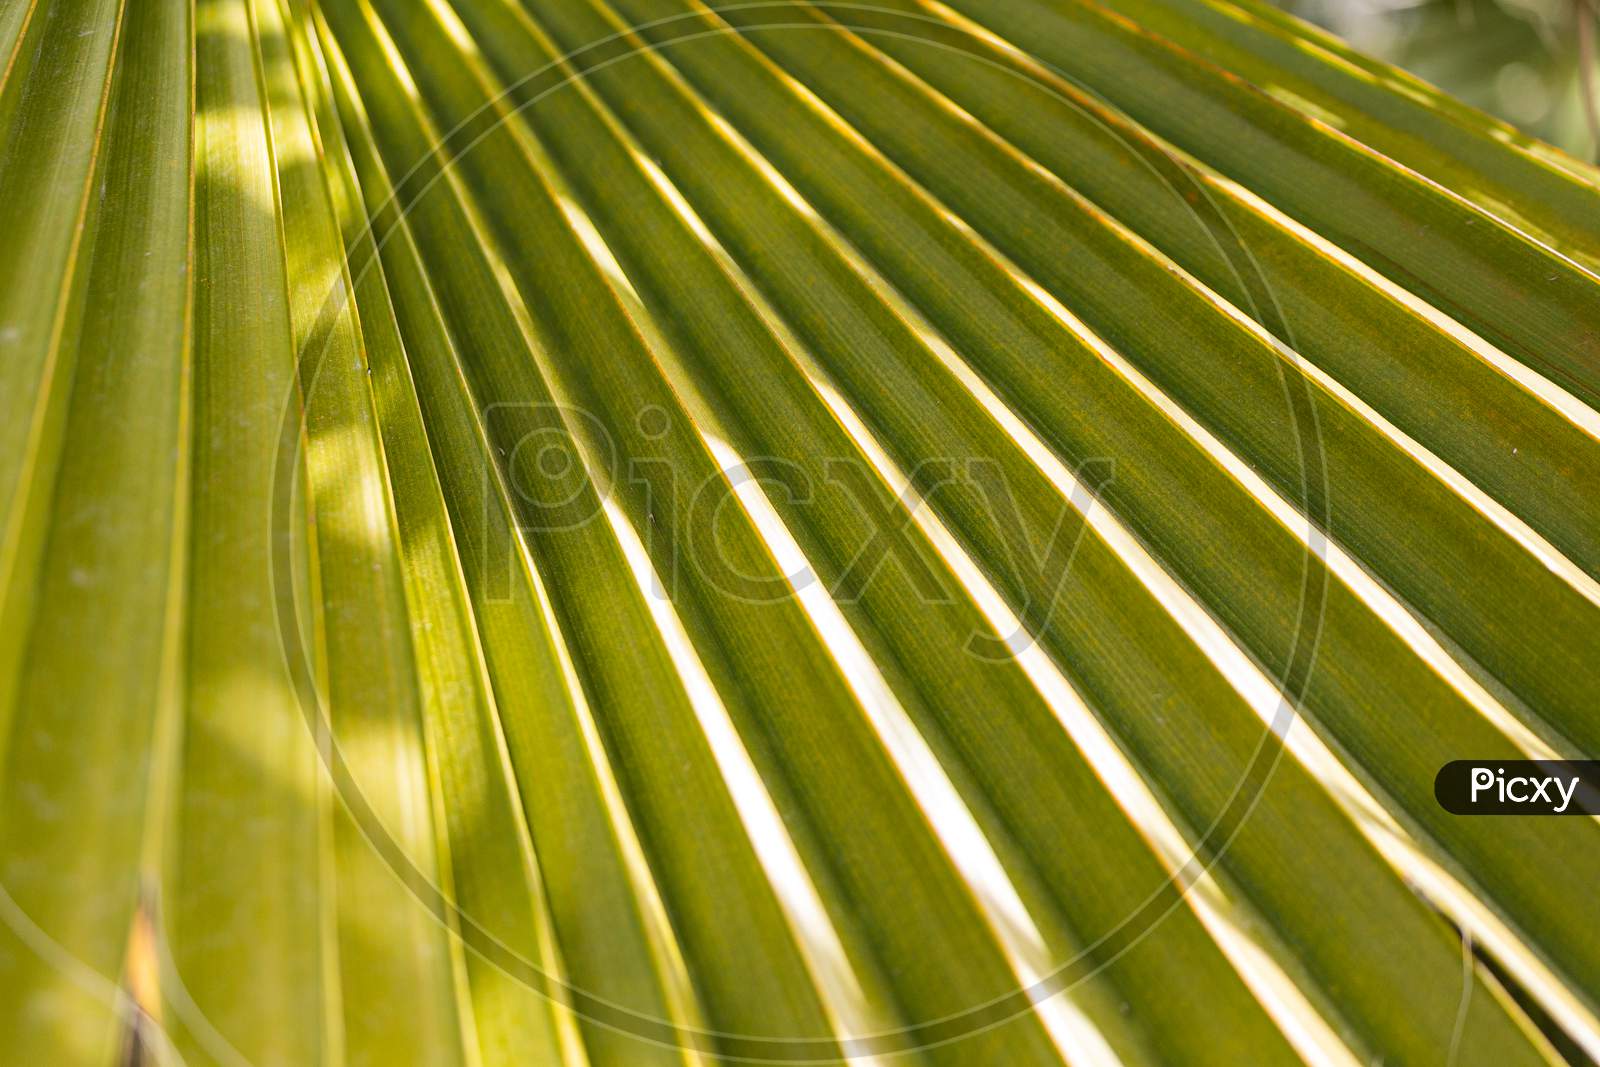 Close-Up Of A Bright Green Leaf Of A Palm Tree Under The Bright Tropical Sun. A Leaf Of A Palm Tree That Looks Like A Folded Sheet Of Paper